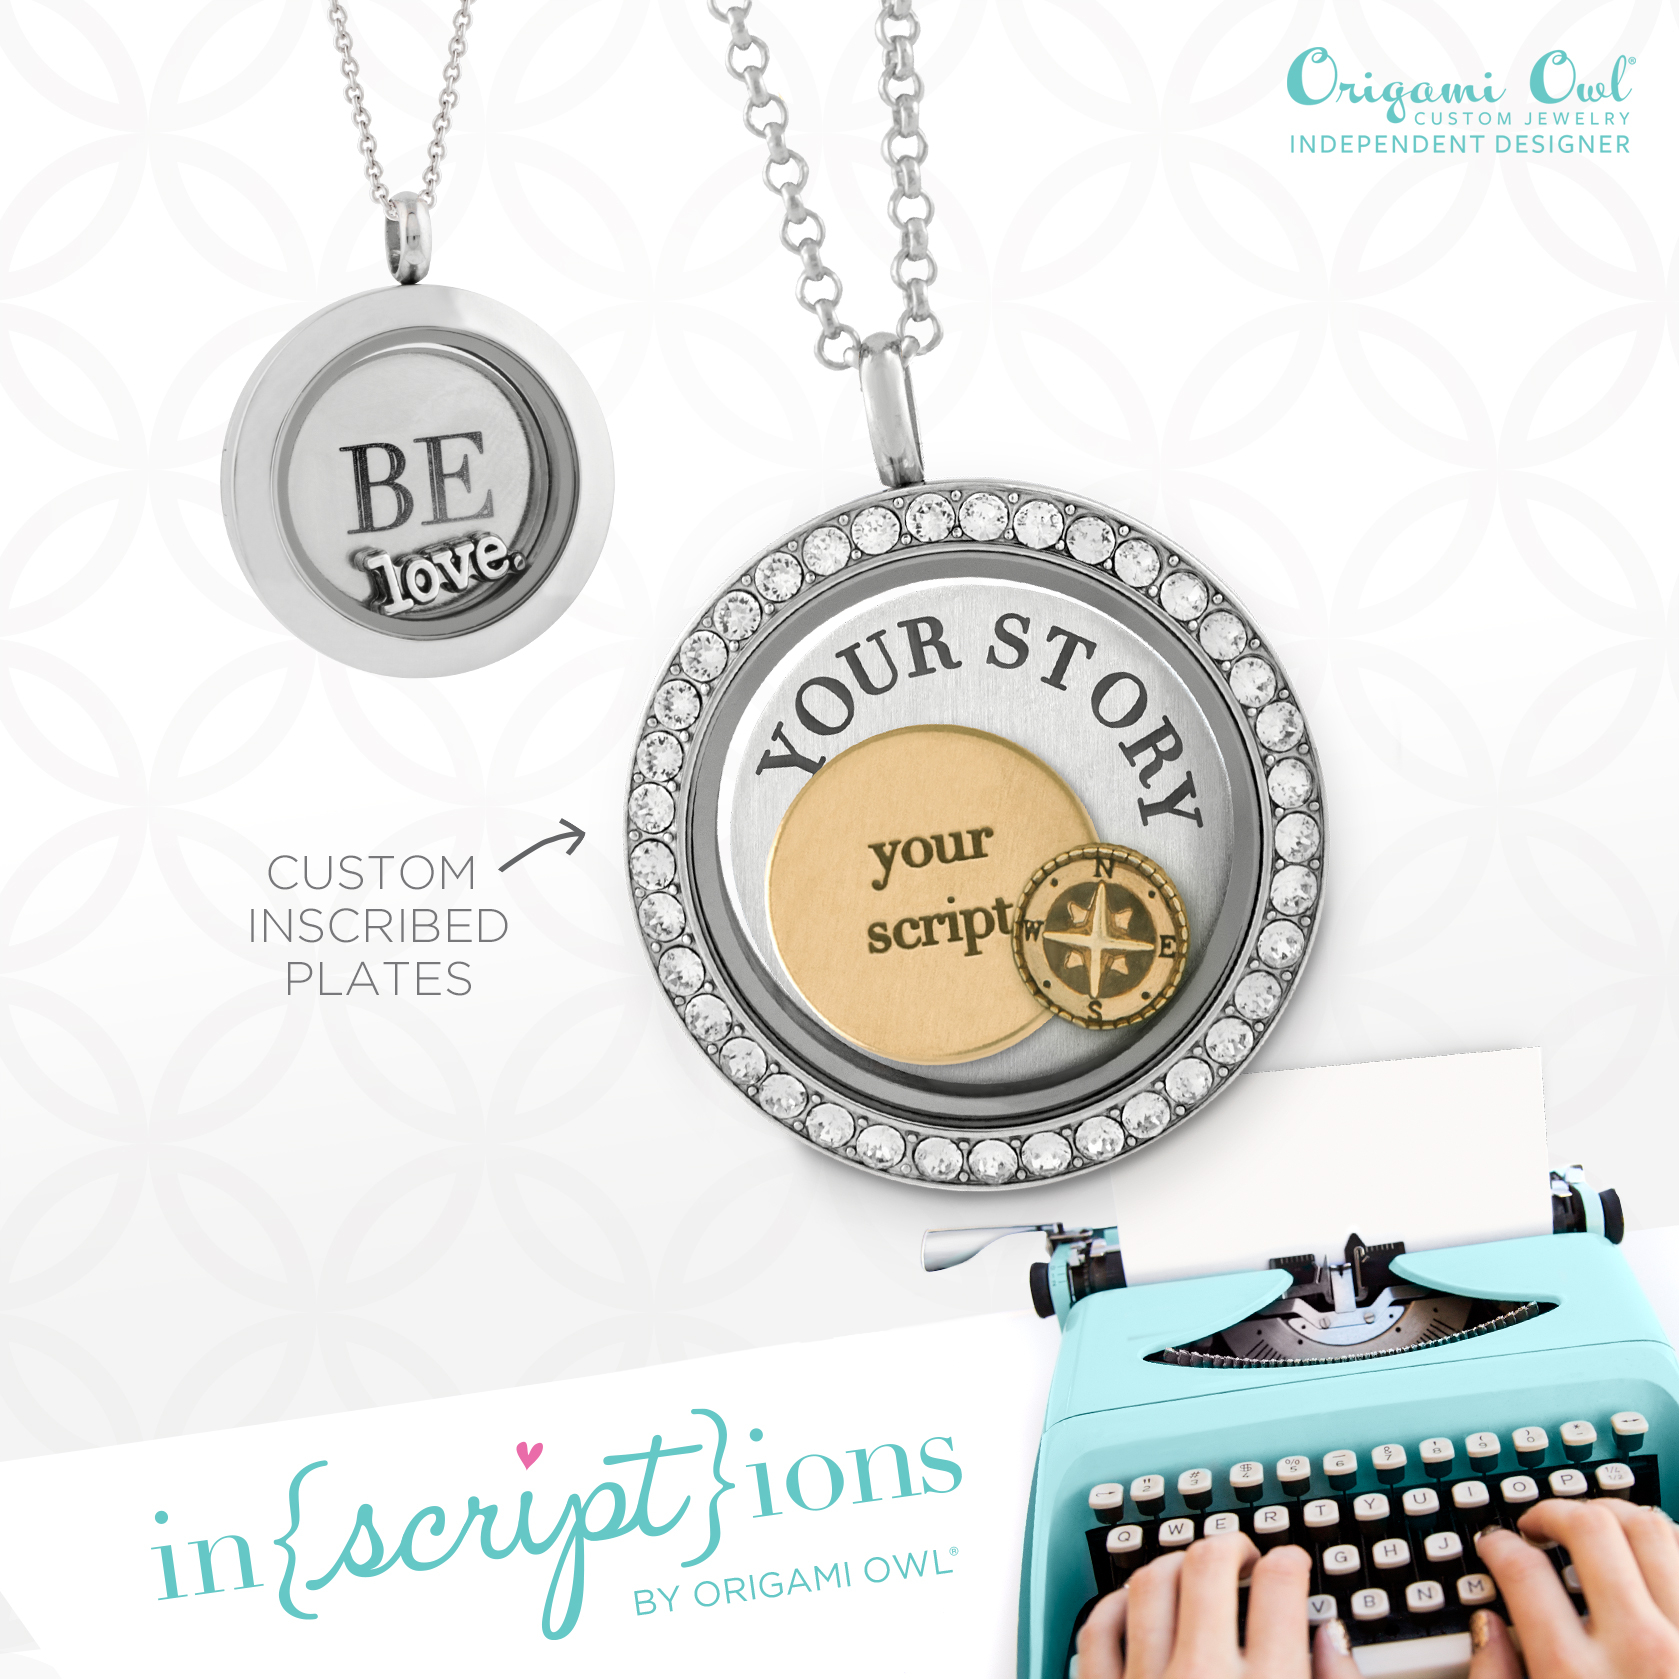 How Many Charms Fit In An Origami Owl Locket Create An Origami Owl Living Locket 5 Simple Steps To Share Your